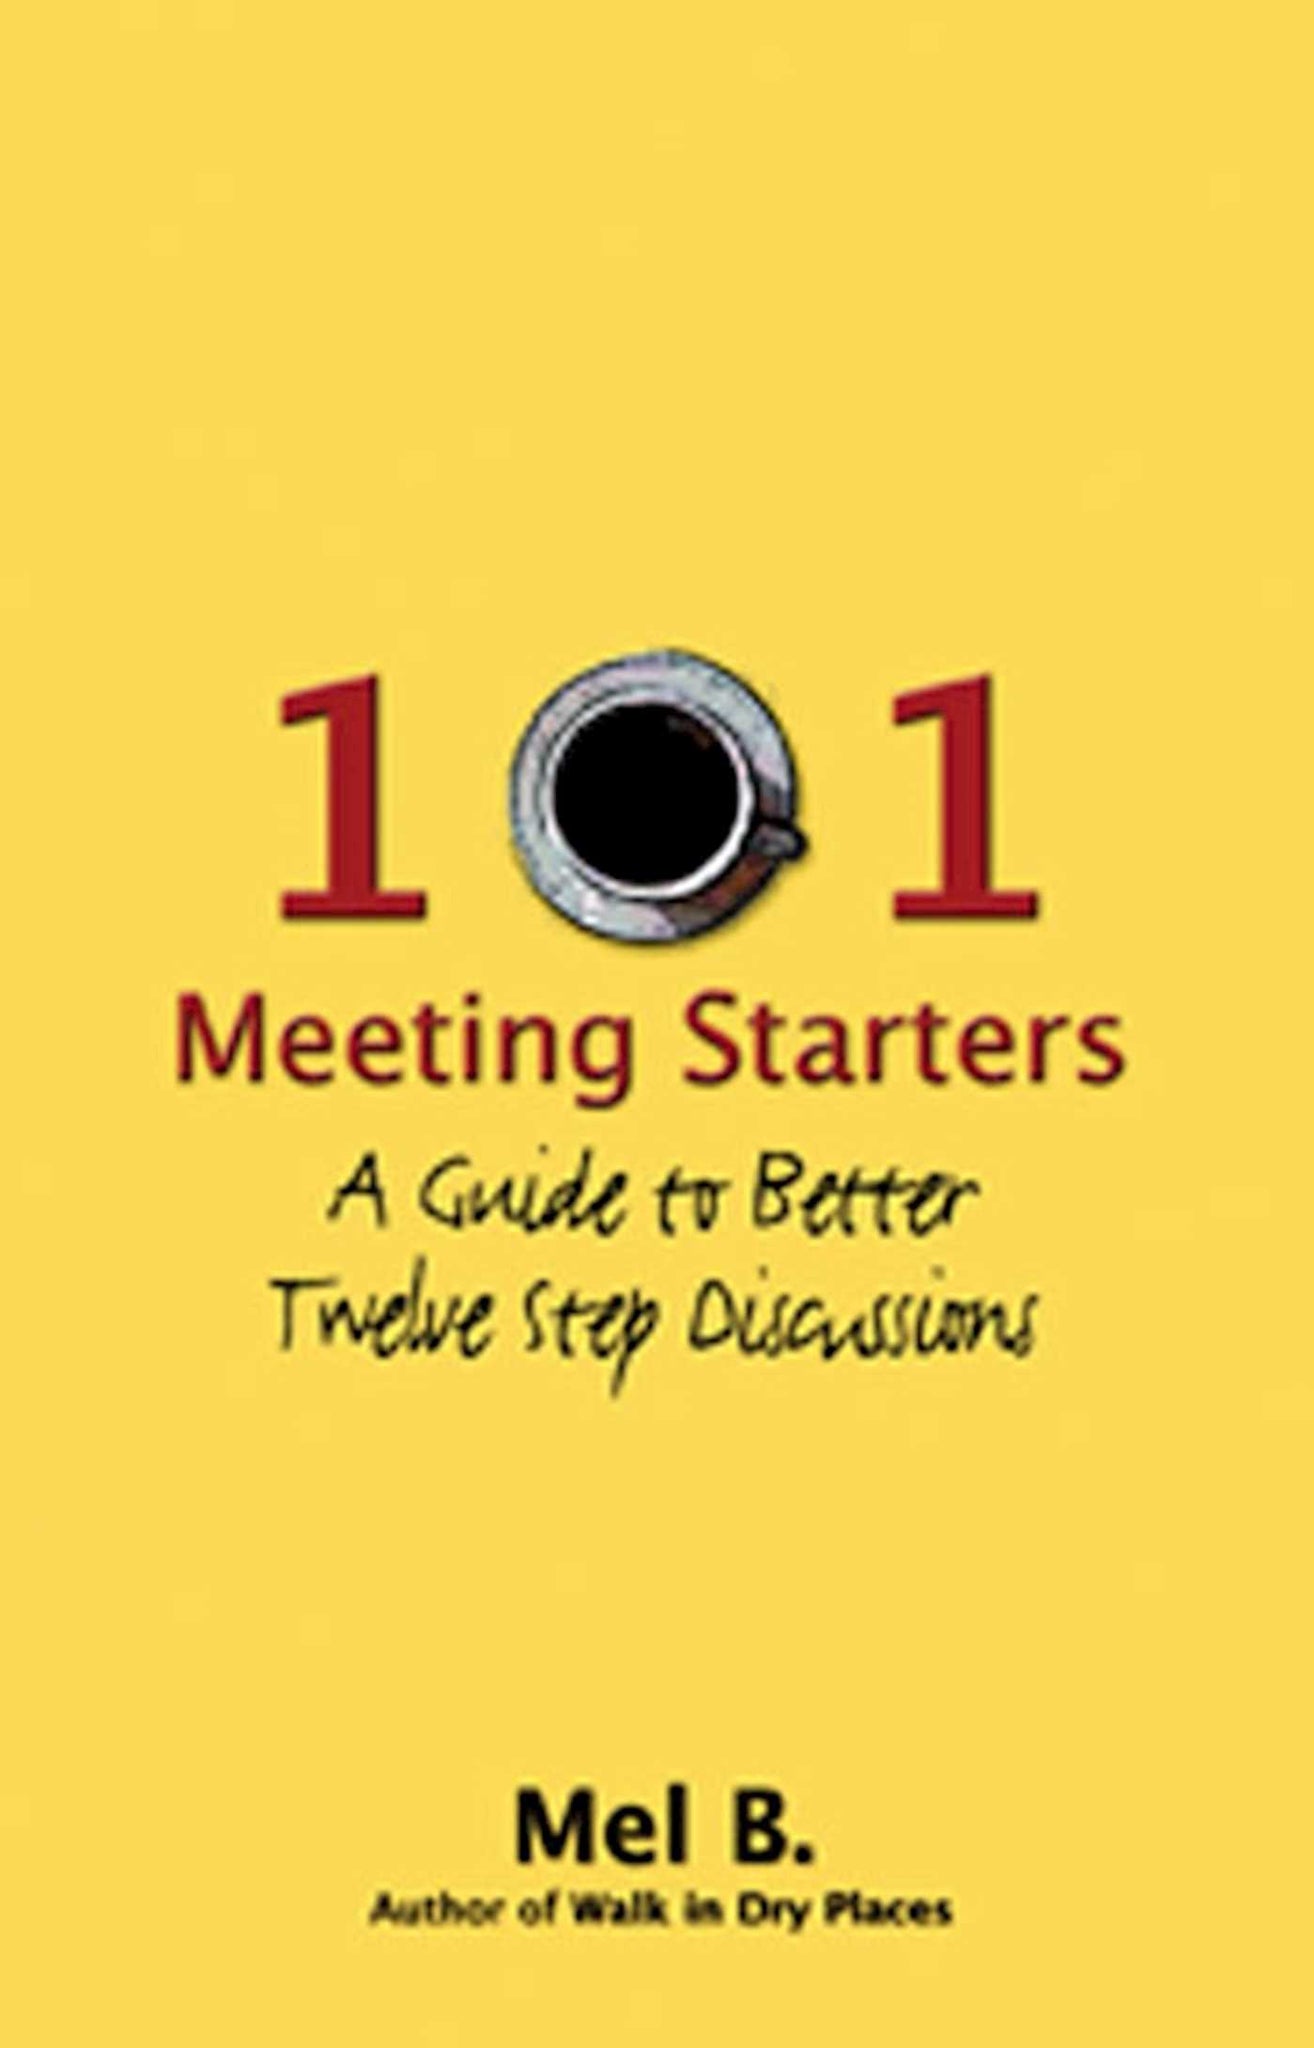 101 Meeting Starters : A Guide to Better Twelve Step Discussions